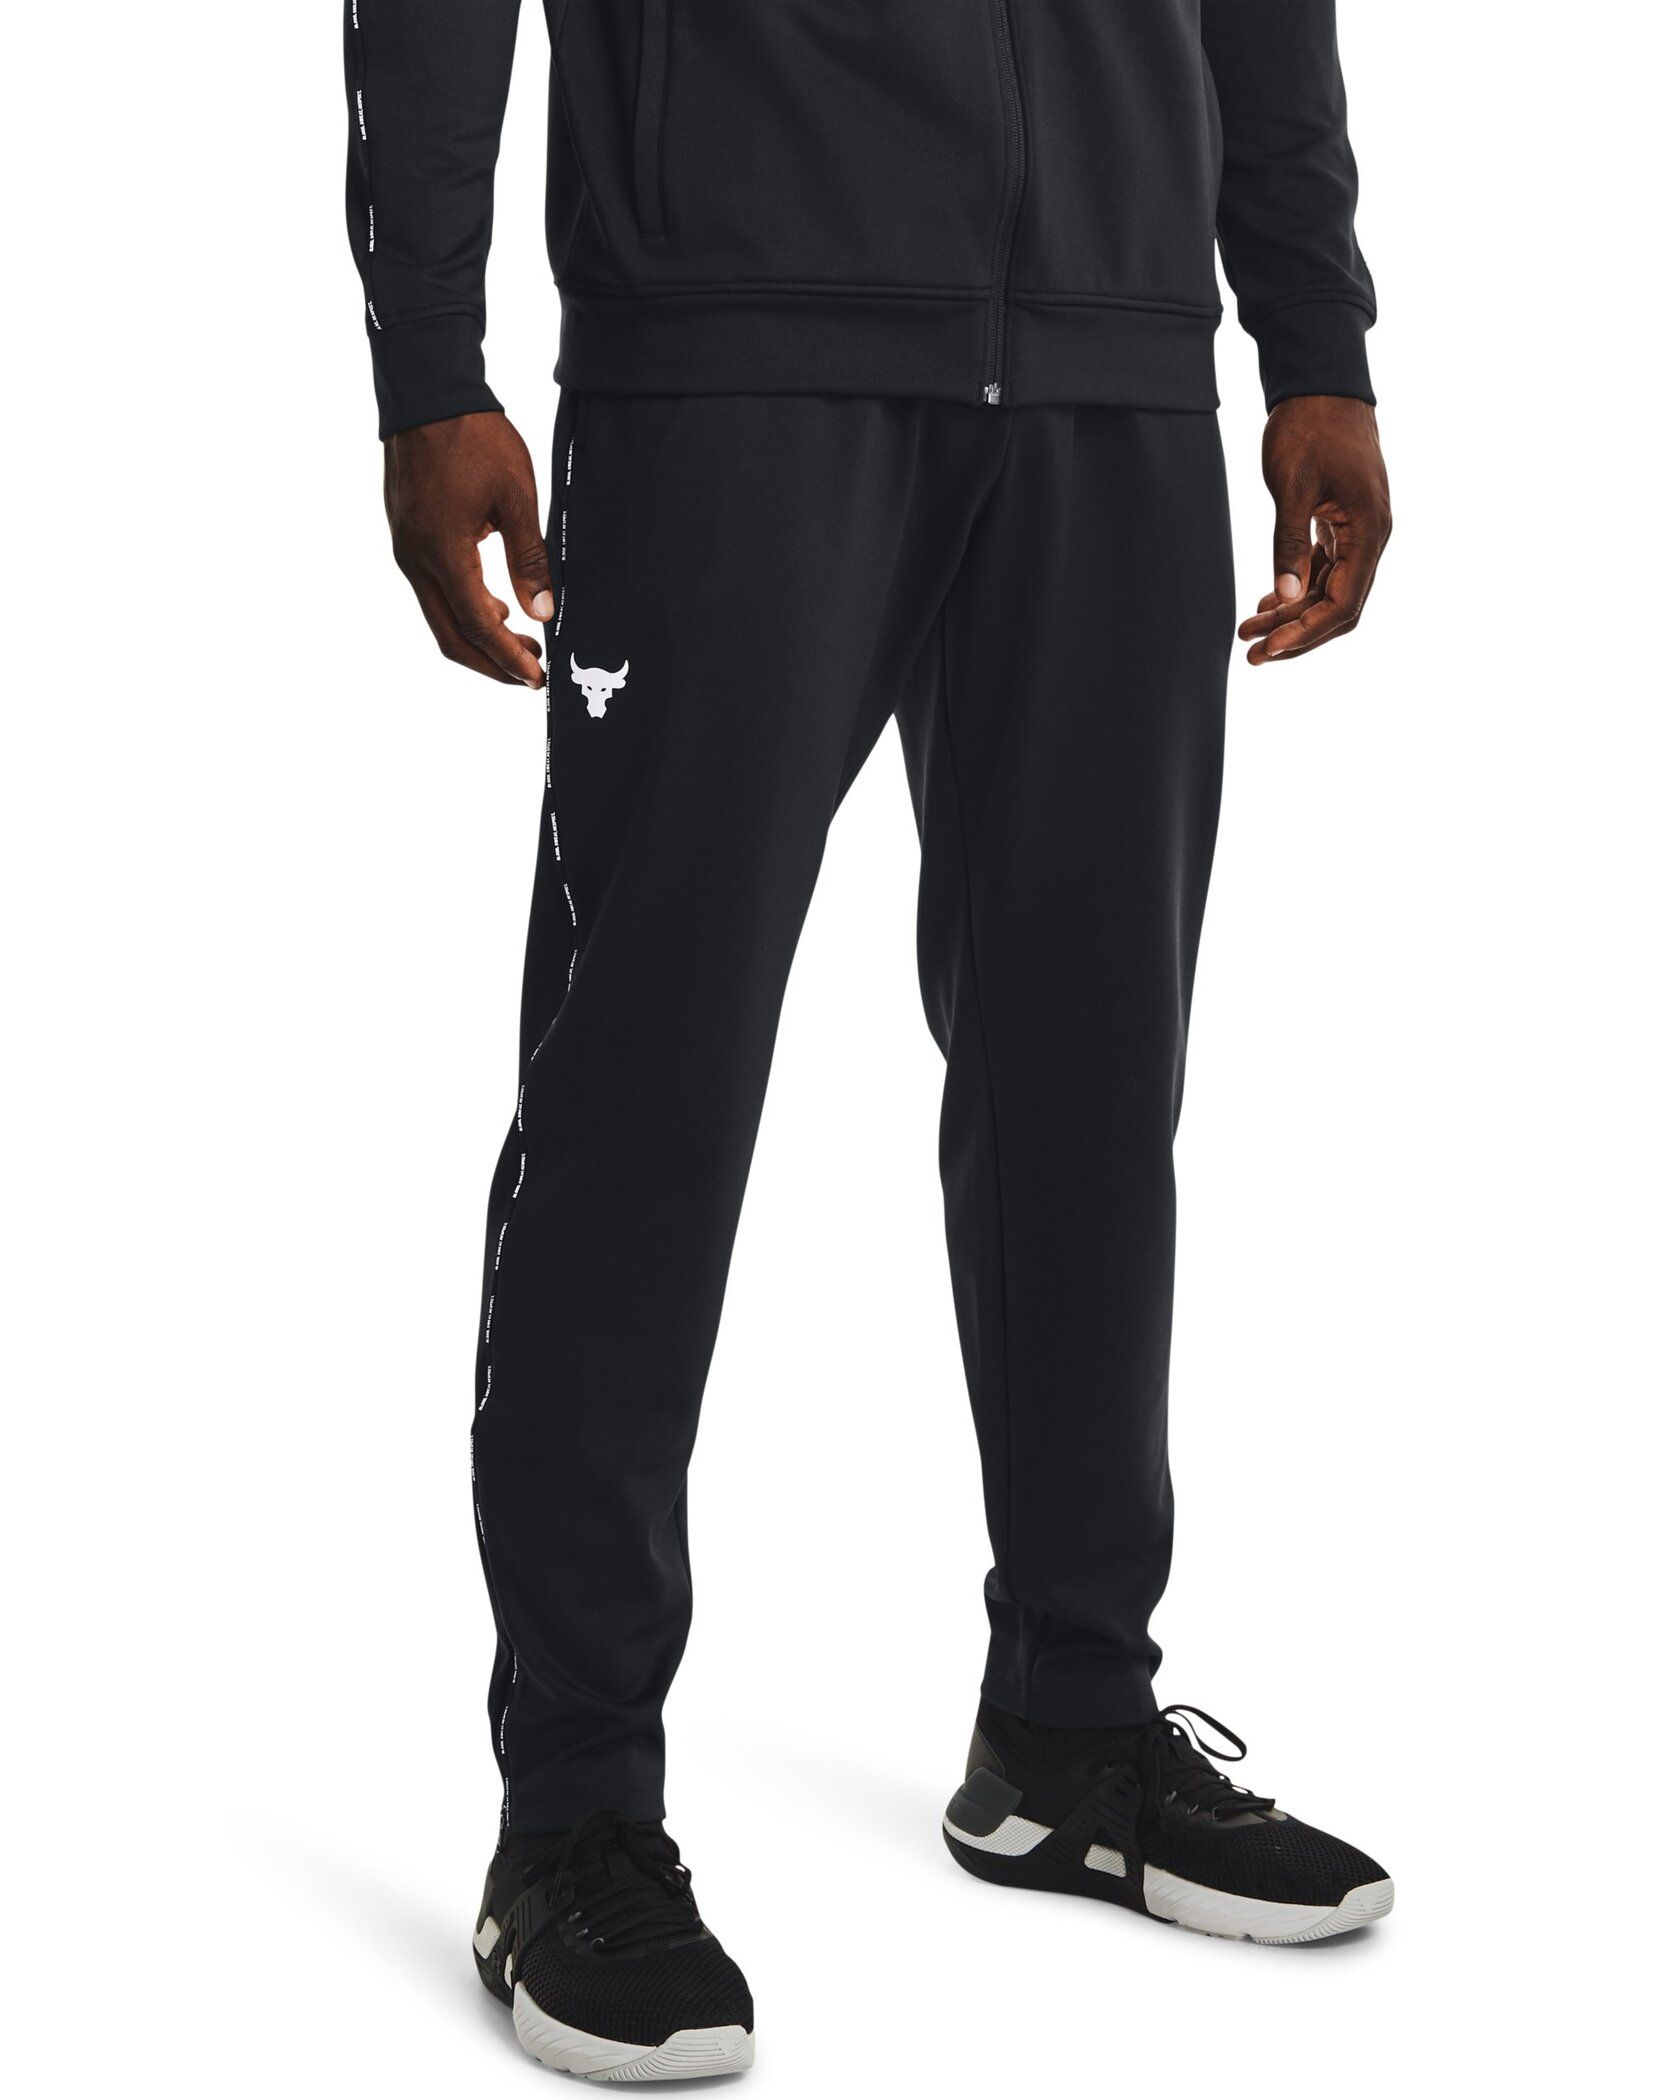 Fitinc NS Lycra Dryfit Airforce Track Pants with Zipper Pockets – FITINC